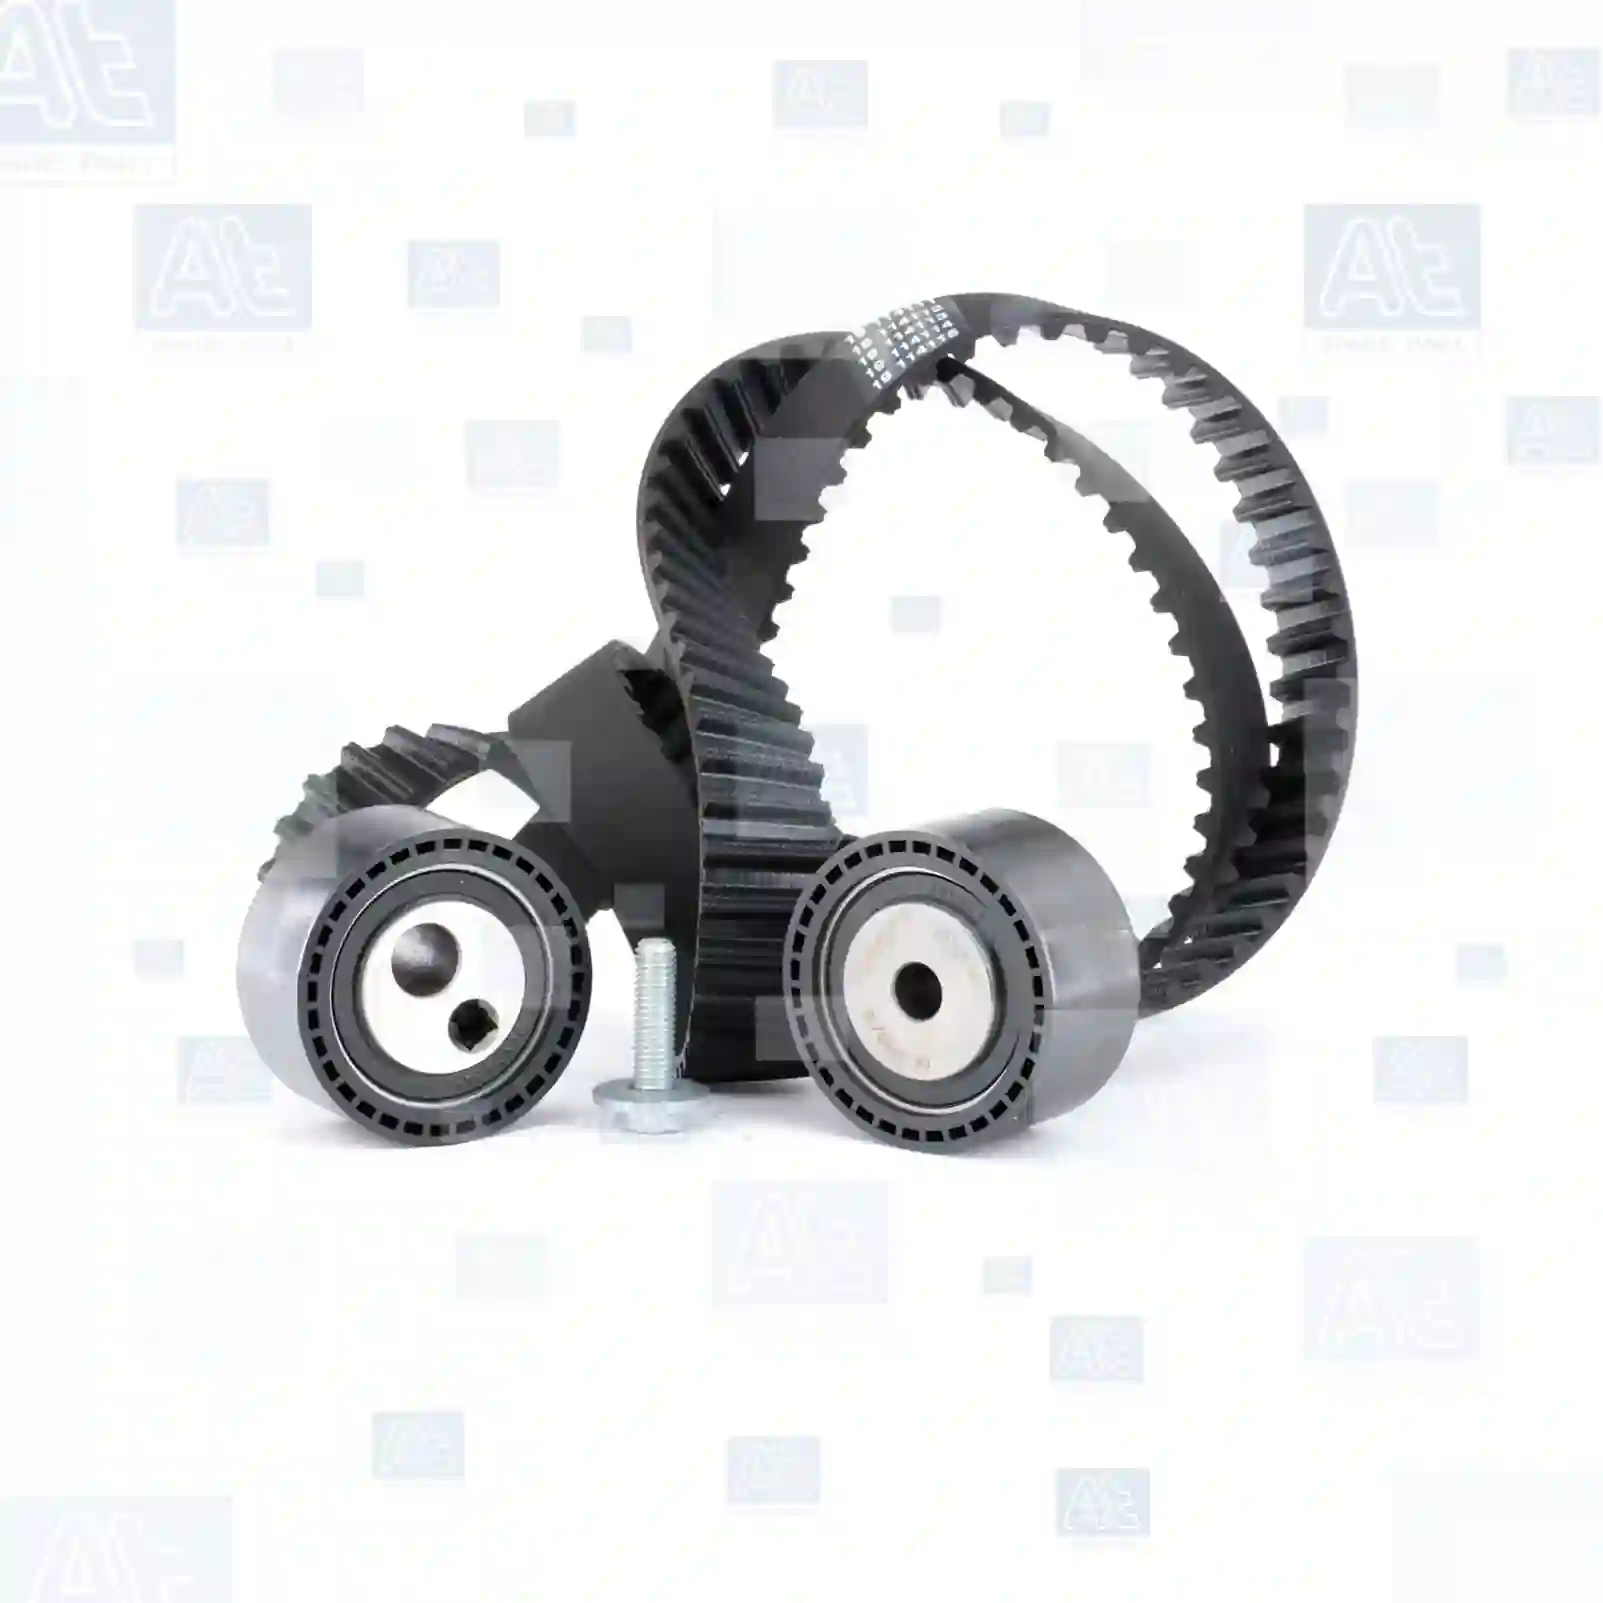 Timing belt kit, at no 77708524, oem no: 9400831409, 9400831789, 083140, 083141, 083162, 083178, 083179, 083182, 083183, 0831N4, 0831N5, 0831R8, 0831V3, 9400831409, 9400831489, 9400831629, 9400831789, 9400831829, 9467538580, 9467626480, 9467628980, 93174265, 9400831409, 9400831789, 9467538580, 9467628980, 083140, 083141, 083162, 083178, 083179, 083182, 083183, 0831N4, 0831N5, 0831R8, 0831V3, SU001-00085 At Spare Part | Engine, Accelerator Pedal, Camshaft, Connecting Rod, Crankcase, Crankshaft, Cylinder Head, Engine Suspension Mountings, Exhaust Manifold, Exhaust Gas Recirculation, Filter Kits, Flywheel Housing, General Overhaul Kits, Engine, Intake Manifold, Oil Cleaner, Oil Cooler, Oil Filter, Oil Pump, Oil Sump, Piston & Liner, Sensor & Switch, Timing Case, Turbocharger, Cooling System, Belt Tensioner, Coolant Filter, Coolant Pipe, Corrosion Prevention Agent, Drive, Expansion Tank, Fan, Intercooler, Monitors & Gauges, Radiator, Thermostat, V-Belt / Timing belt, Water Pump, Fuel System, Electronical Injector Unit, Feed Pump, Fuel Filter, cpl., Fuel Gauge Sender,  Fuel Line, Fuel Pump, Fuel Tank, Injection Line Kit, Injection Pump, Exhaust System, Clutch & Pedal, Gearbox, Propeller Shaft, Axles, Brake System, Hubs & Wheels, Suspension, Leaf Spring, Universal Parts / Accessories, Steering, Electrical System, Cabin Timing belt kit, at no 77708524, oem no: 9400831409, 9400831789, 083140, 083141, 083162, 083178, 083179, 083182, 083183, 0831N4, 0831N5, 0831R8, 0831V3, 9400831409, 9400831489, 9400831629, 9400831789, 9400831829, 9467538580, 9467626480, 9467628980, 93174265, 9400831409, 9400831789, 9467538580, 9467628980, 083140, 083141, 083162, 083178, 083179, 083182, 083183, 0831N4, 0831N5, 0831R8, 0831V3, SU001-00085 At Spare Part | Engine, Accelerator Pedal, Camshaft, Connecting Rod, Crankcase, Crankshaft, Cylinder Head, Engine Suspension Mountings, Exhaust Manifold, Exhaust Gas Recirculation, Filter Kits, Flywheel Housing, General Overhaul Kits, Engine, Intake Manifold, Oil Cleaner, Oil Cooler, Oil Filter, Oil Pump, Oil Sump, Piston & Liner, Sensor & Switch, Timing Case, Turbocharger, Cooling System, Belt Tensioner, Coolant Filter, Coolant Pipe, Corrosion Prevention Agent, Drive, Expansion Tank, Fan, Intercooler, Monitors & Gauges, Radiator, Thermostat, V-Belt / Timing belt, Water Pump, Fuel System, Electronical Injector Unit, Feed Pump, Fuel Filter, cpl., Fuel Gauge Sender,  Fuel Line, Fuel Pump, Fuel Tank, Injection Line Kit, Injection Pump, Exhaust System, Clutch & Pedal, Gearbox, Propeller Shaft, Axles, Brake System, Hubs & Wheels, Suspension, Leaf Spring, Universal Parts / Accessories, Steering, Electrical System, Cabin